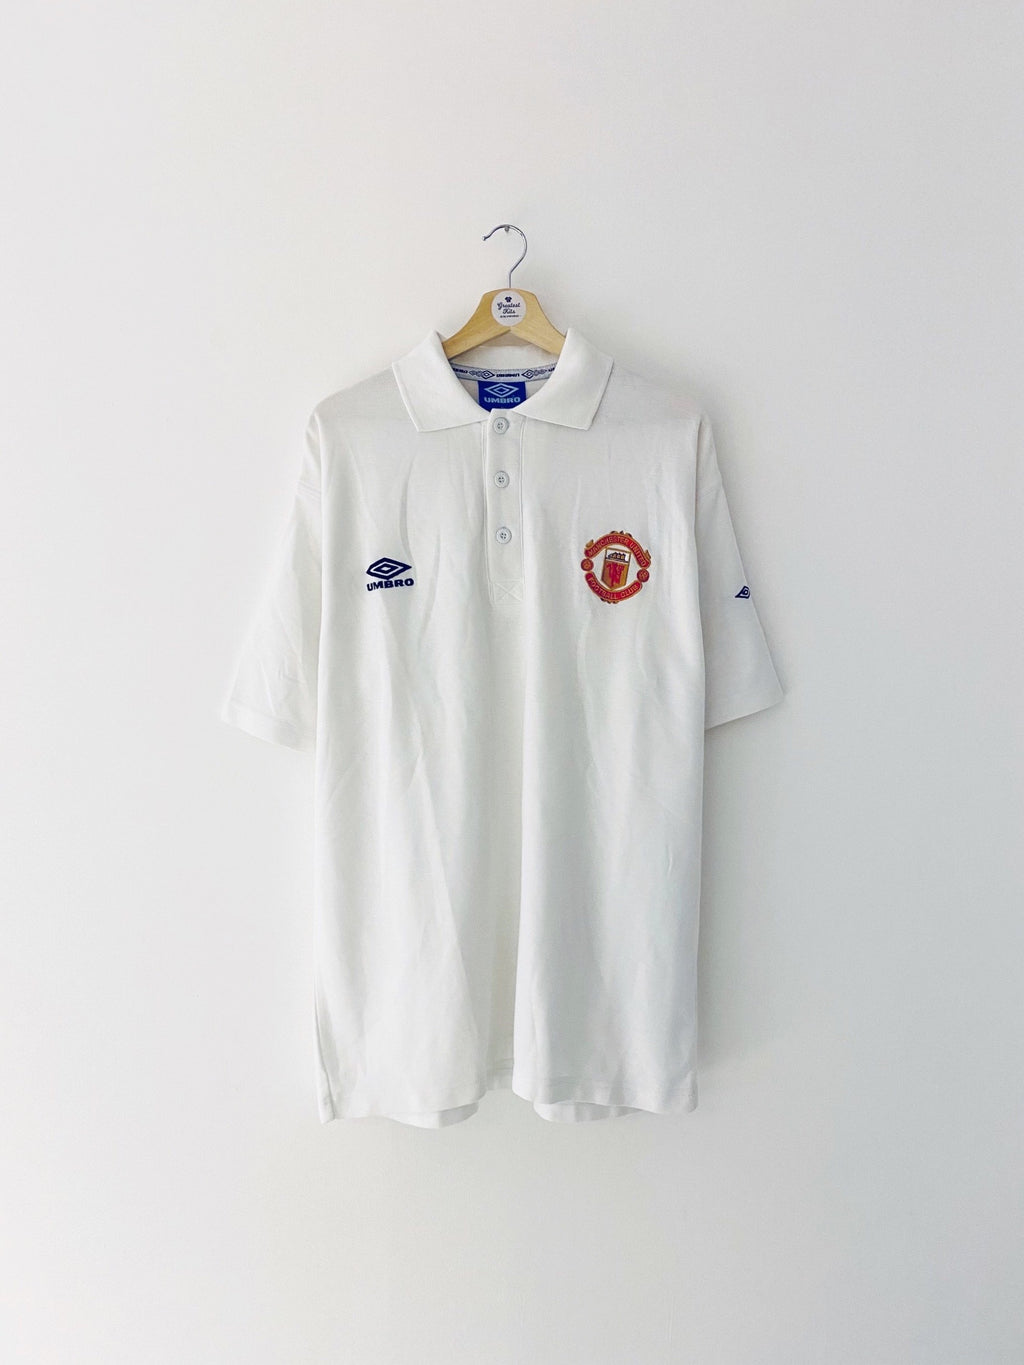 Polo Manchester United 1998/99 (XL) 9/10